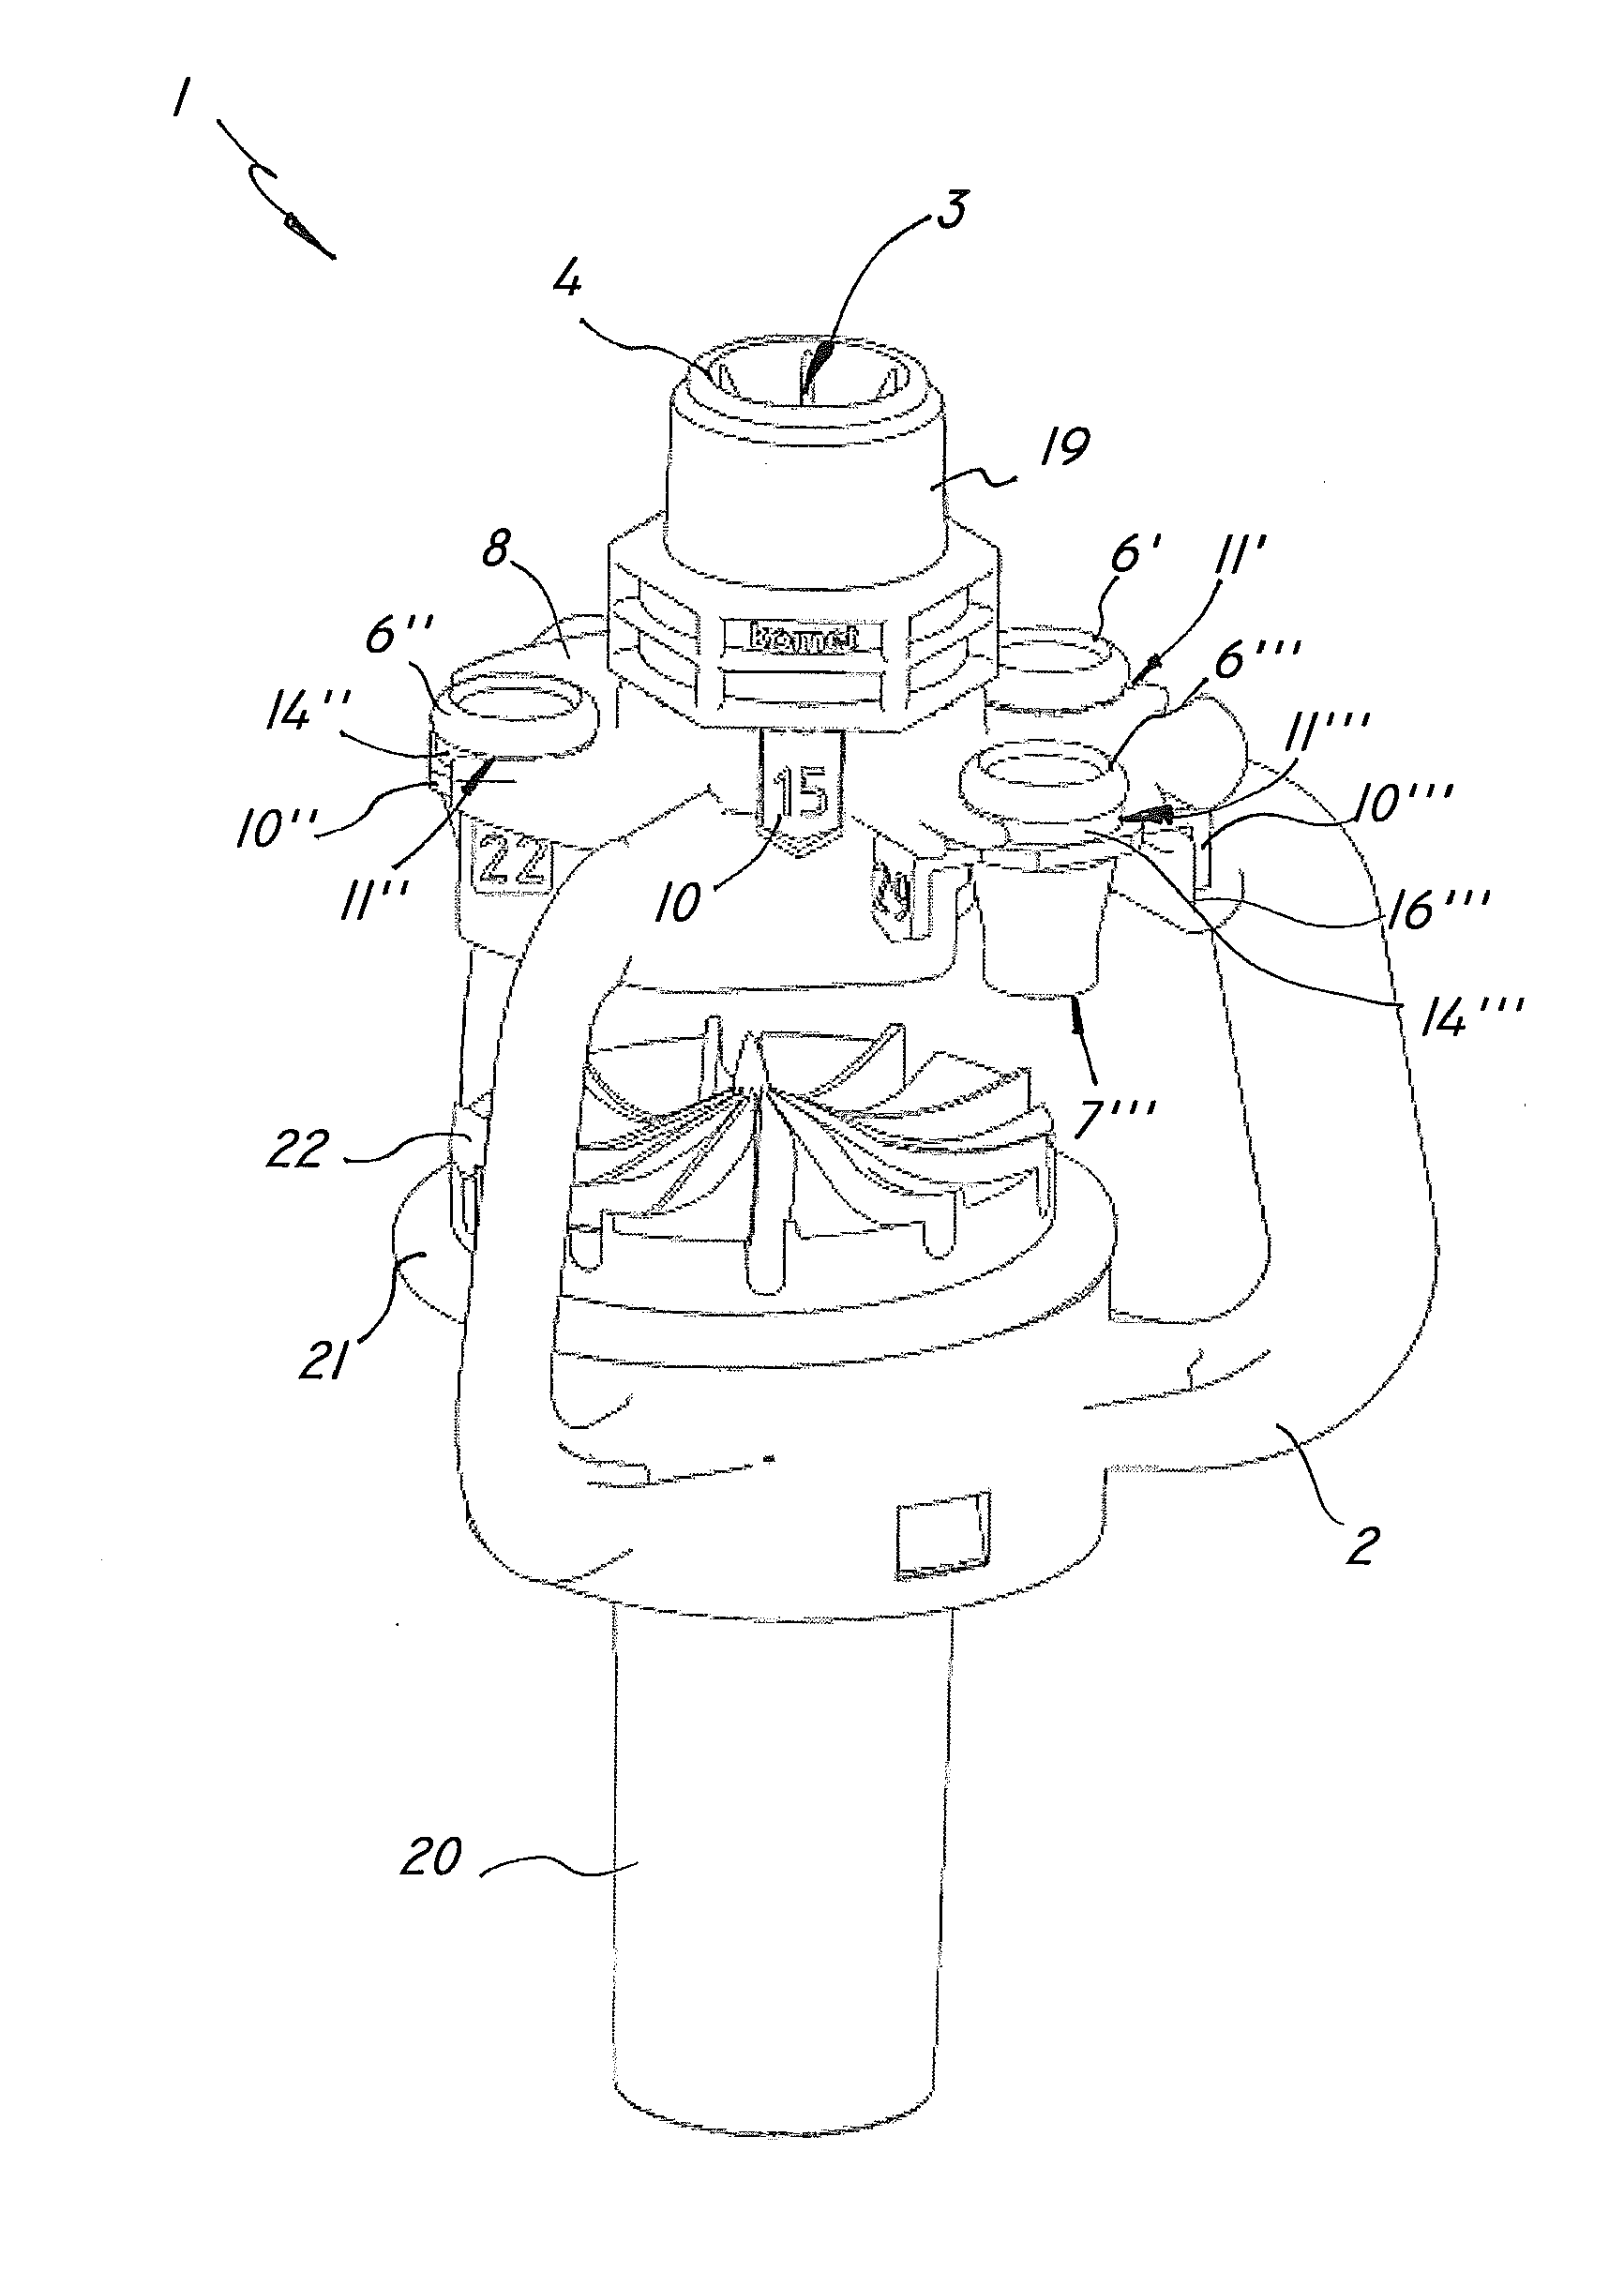 Liquid diffusing device with interchangeable nozzels